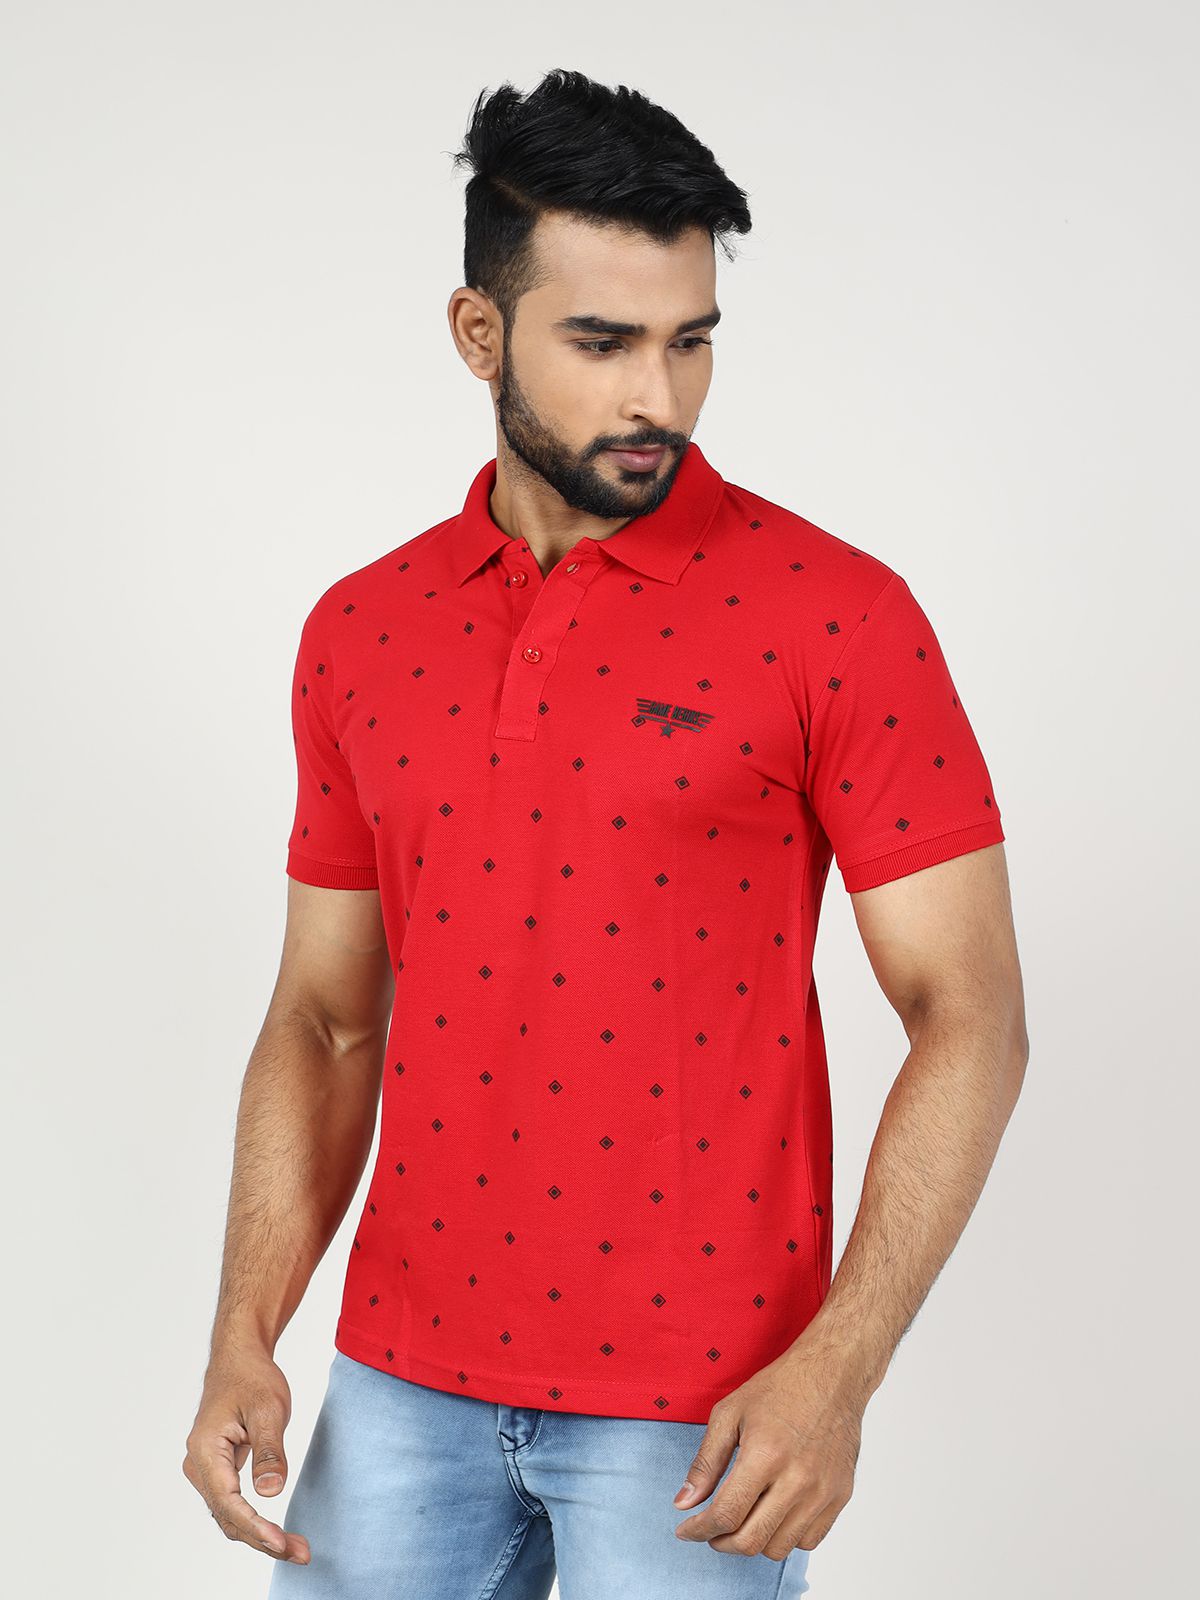     			GAME BEGINS Cotton Slim Fit Printed Half Sleeves Men's Polo T Shirt - Red ( Pack of 1 )